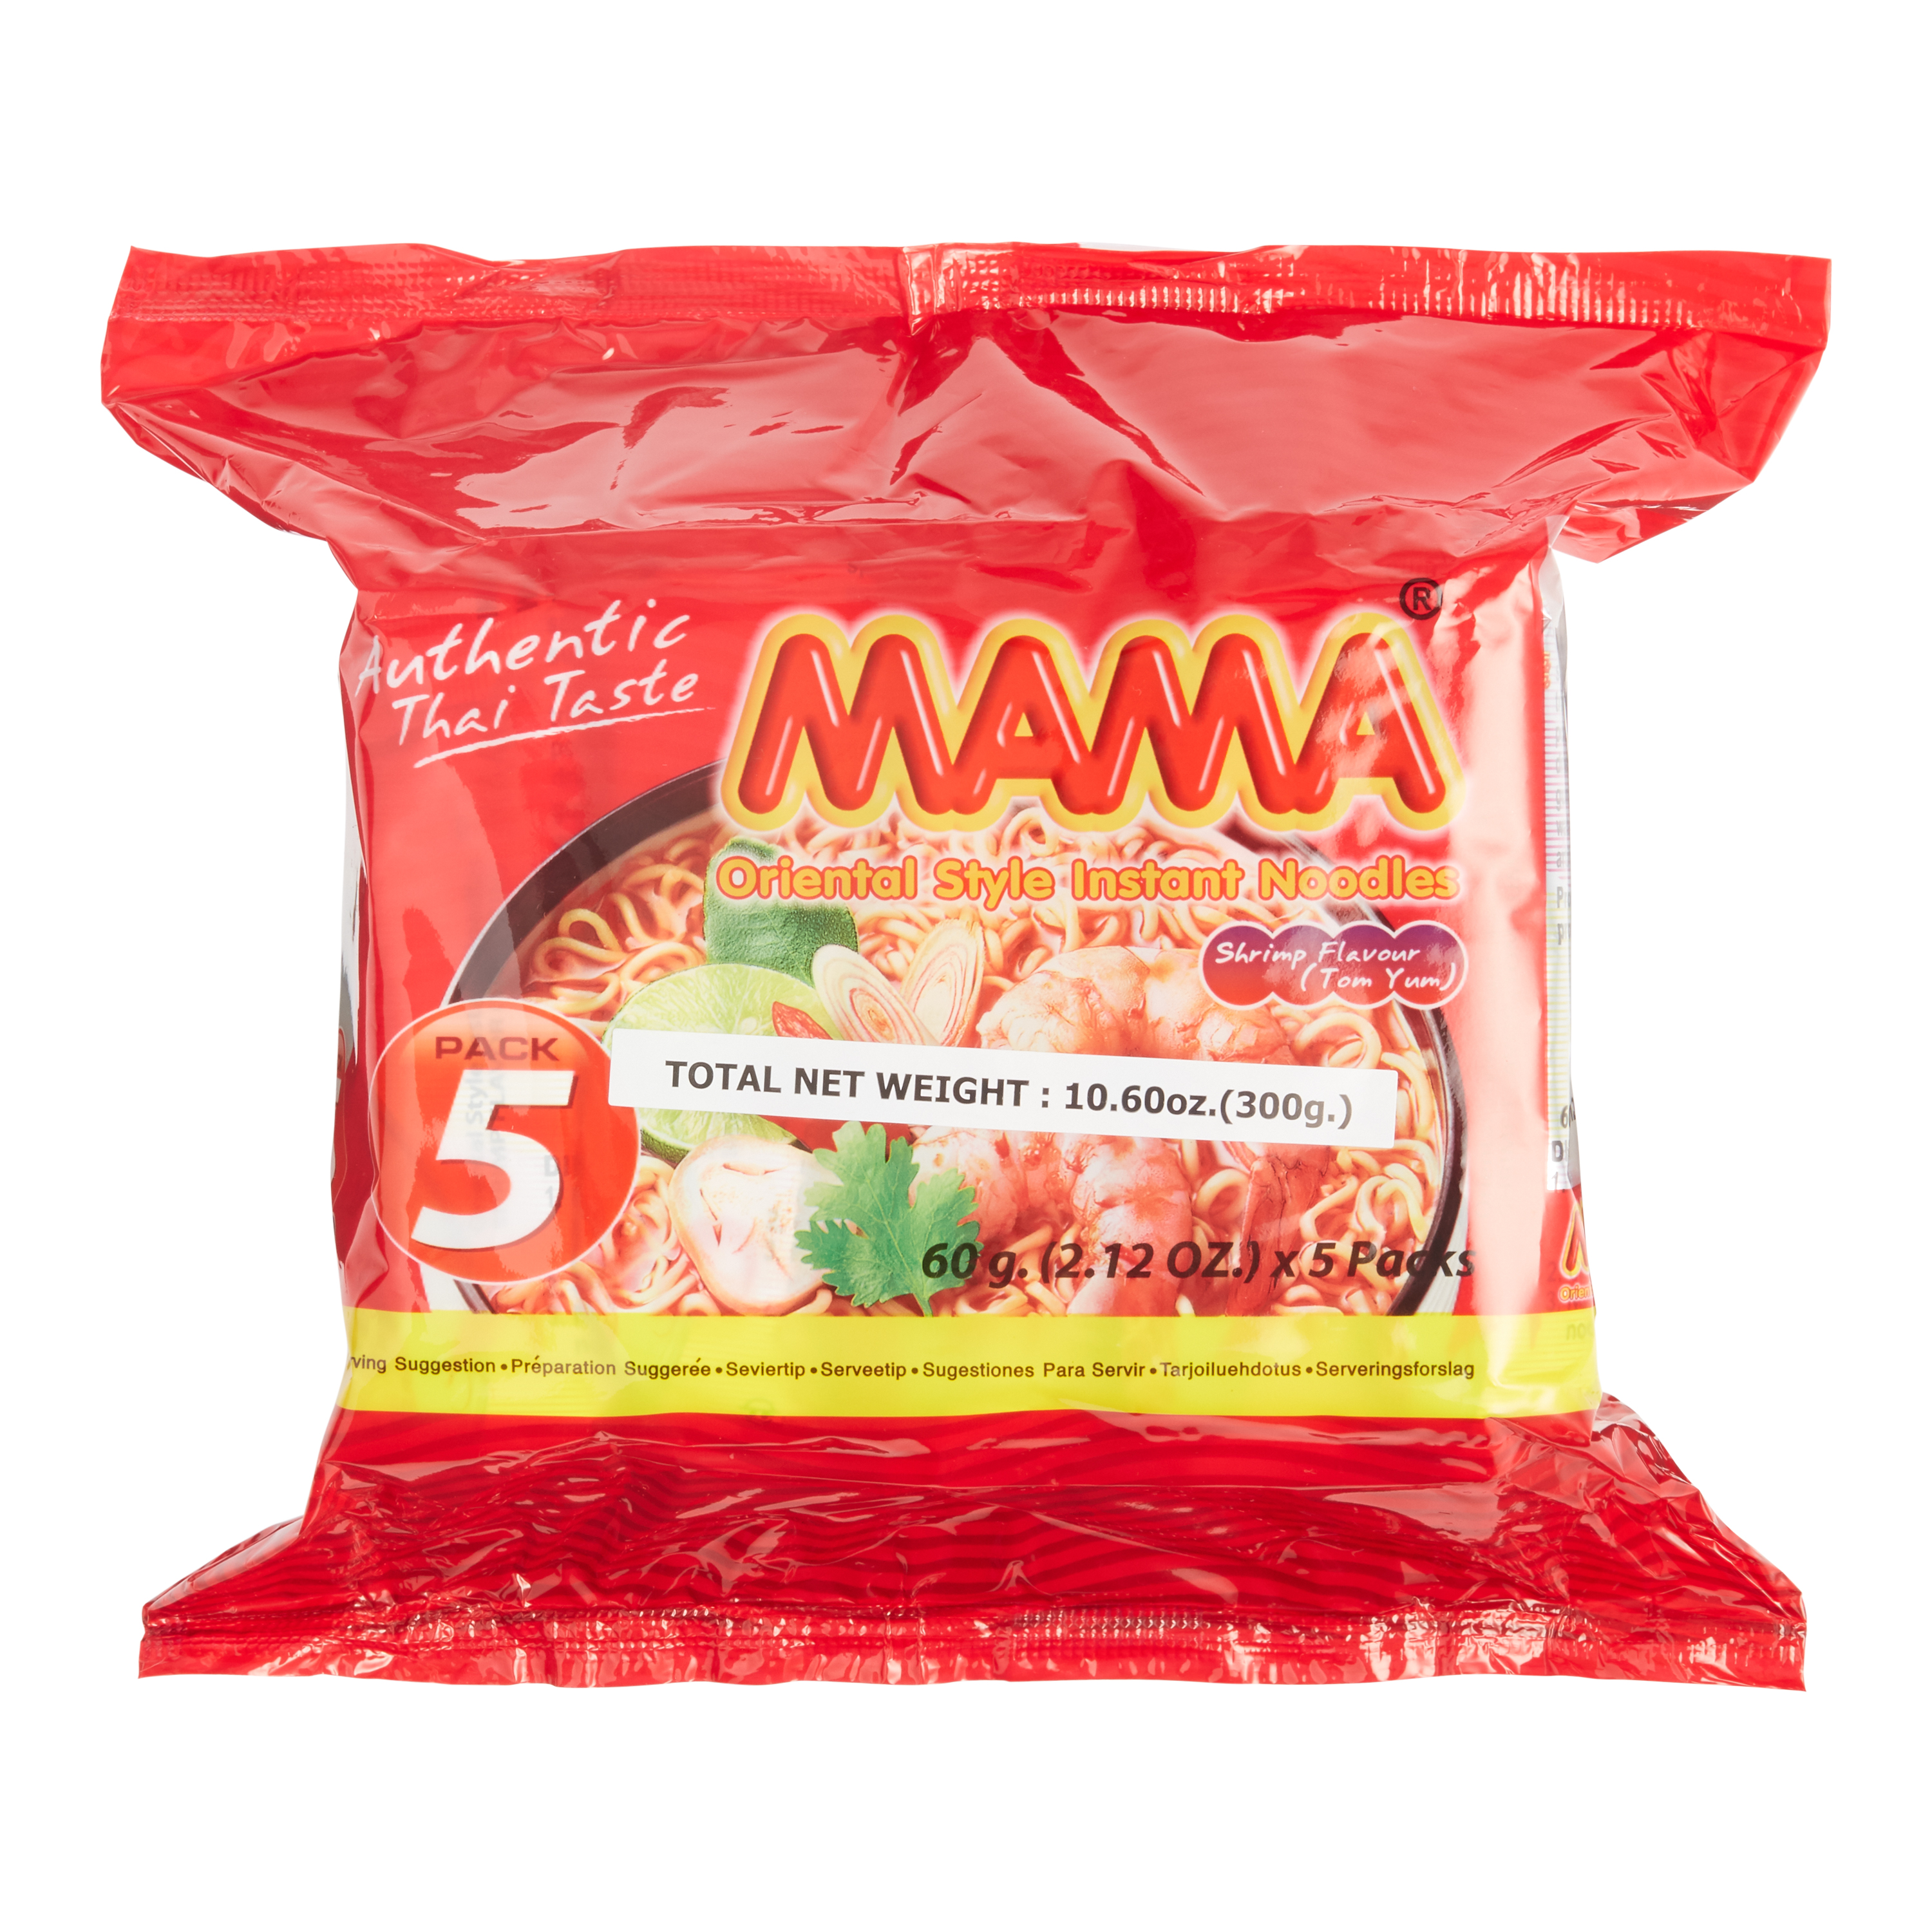 Re-Review: MAMA Oriental Style Instant Noodles Hot & Spicy Flavor